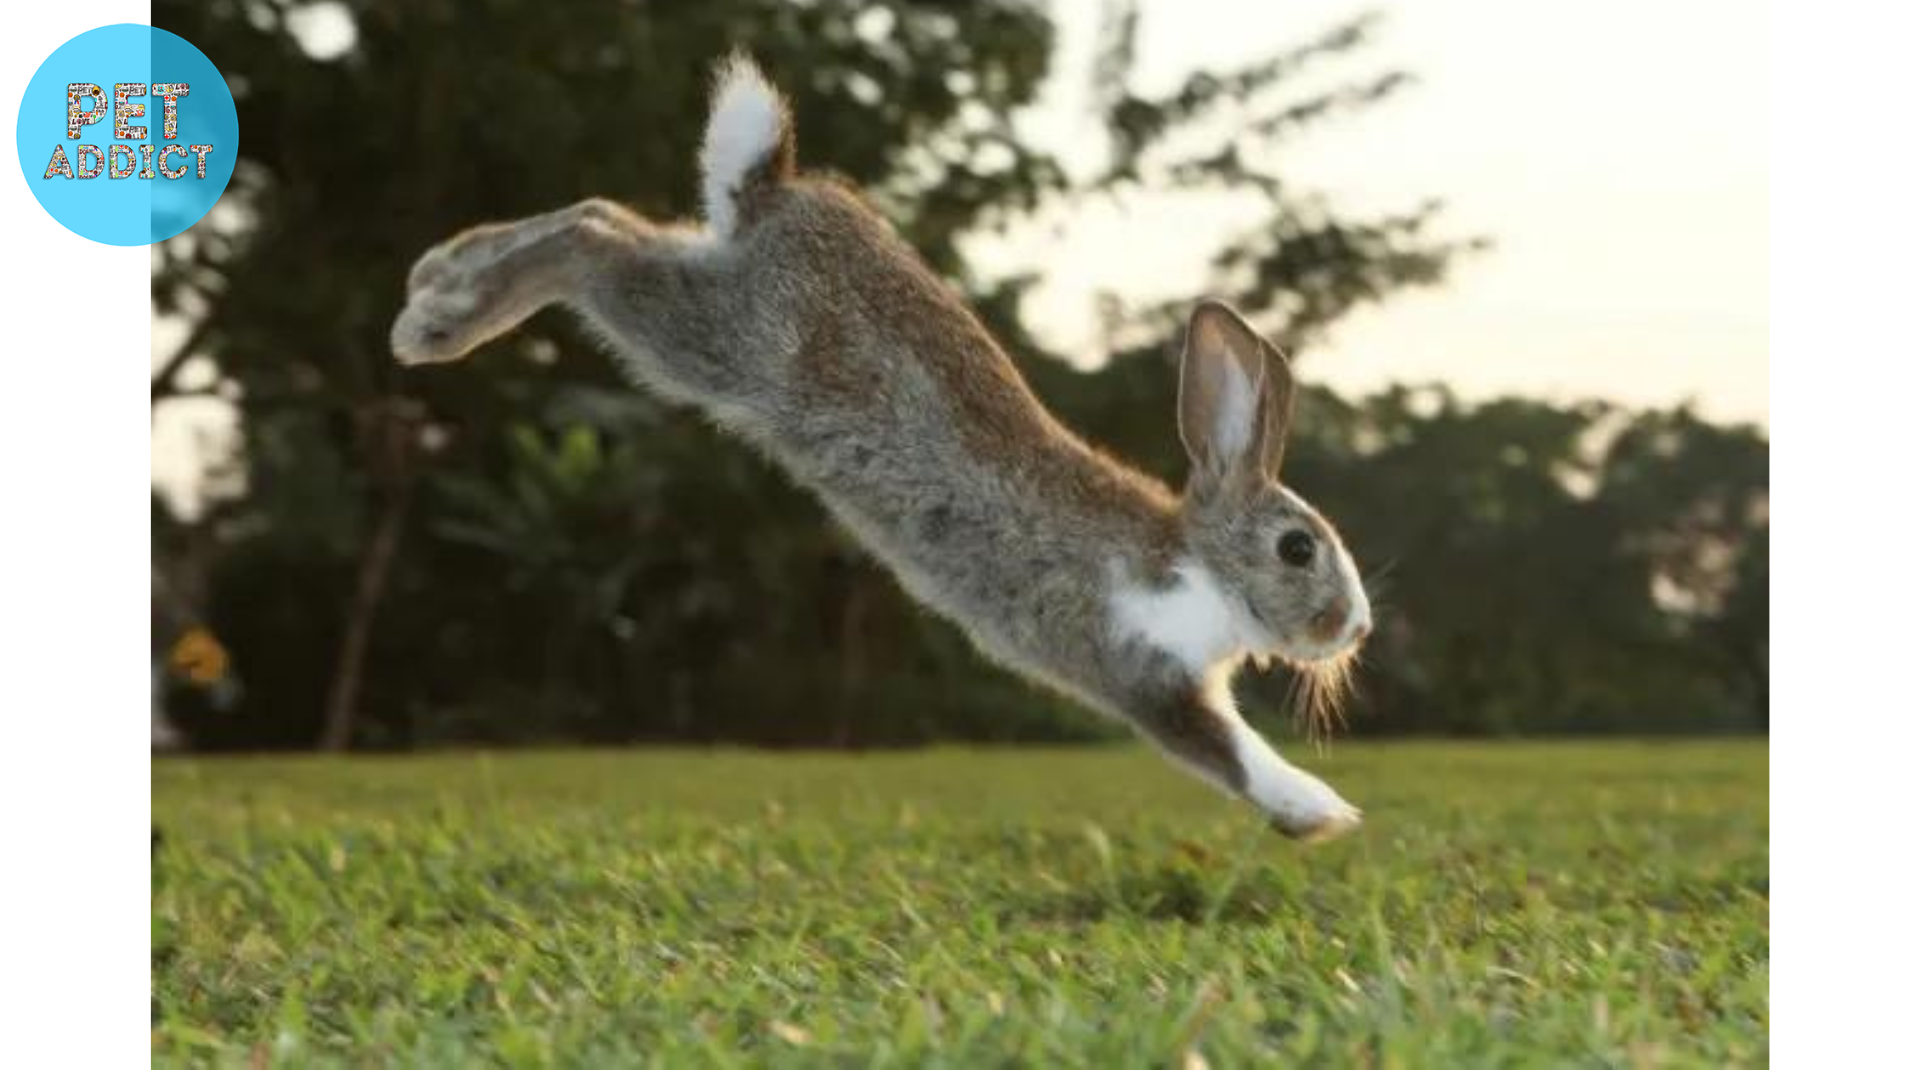 Benefits of Exercise for Rabbits